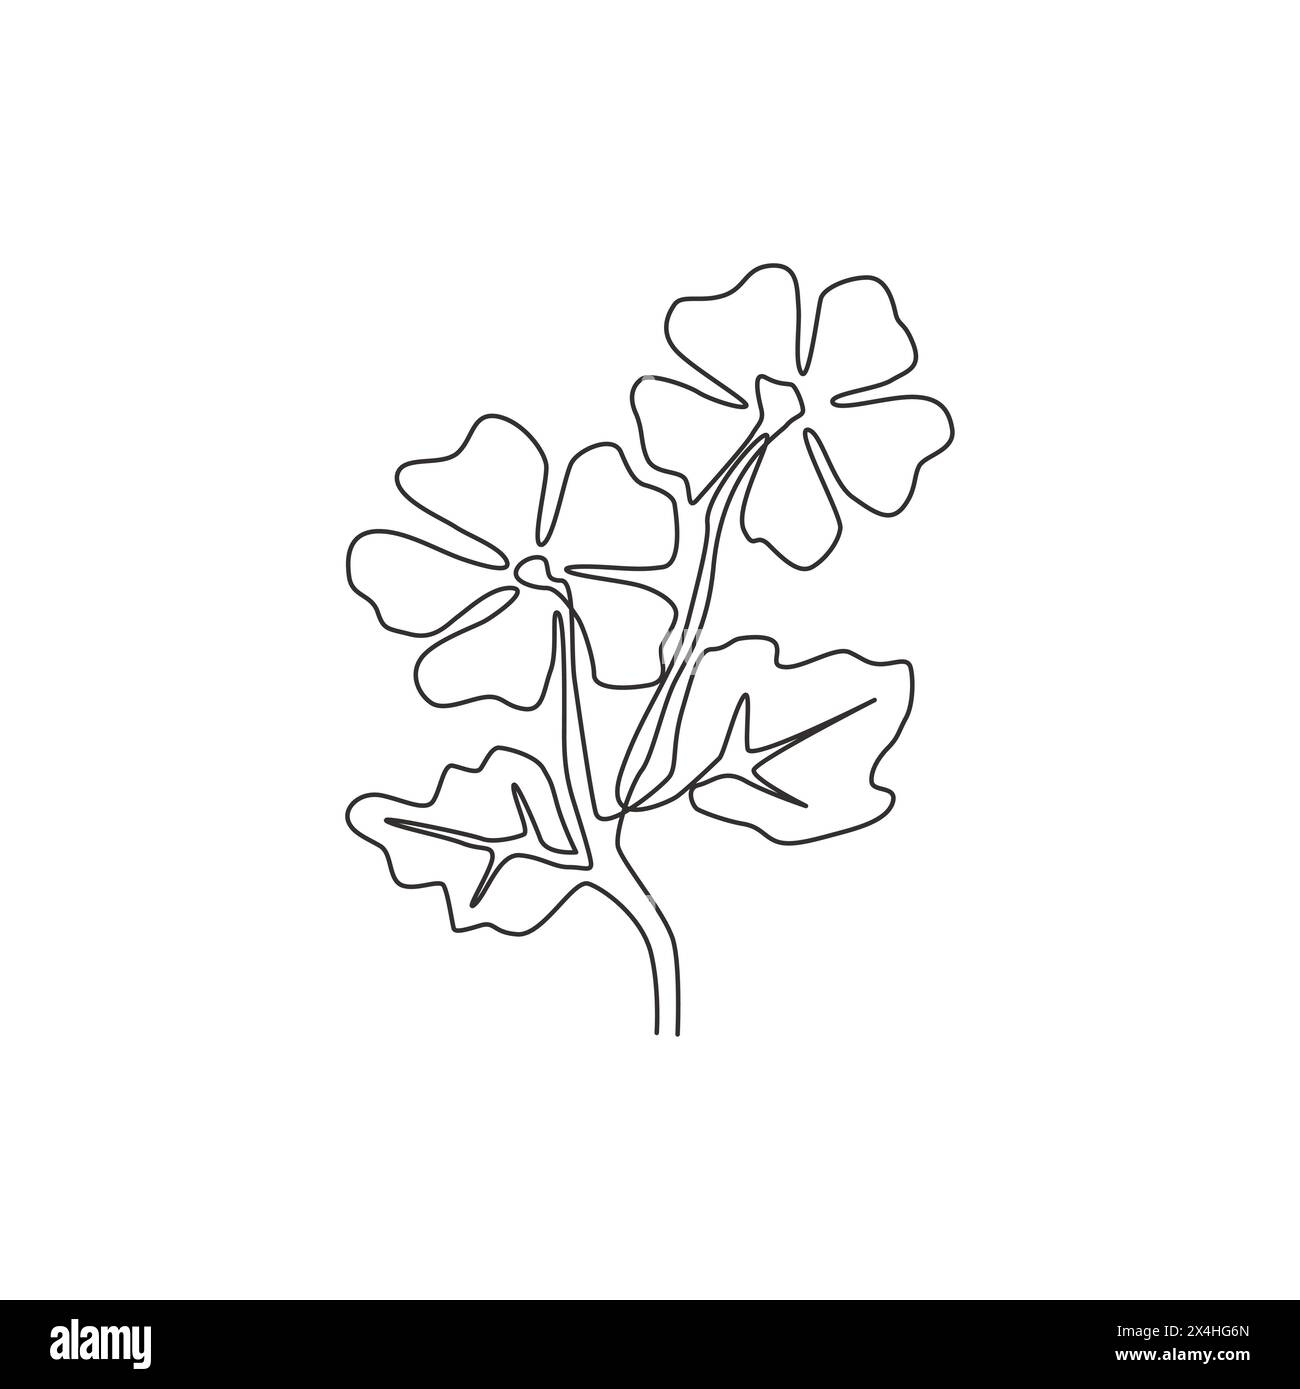 Single one line drawing of beauty fresh common mallow for home decor wall art poster print. Printable decorative malva sylvestris flower concept. Mode Stock Vector